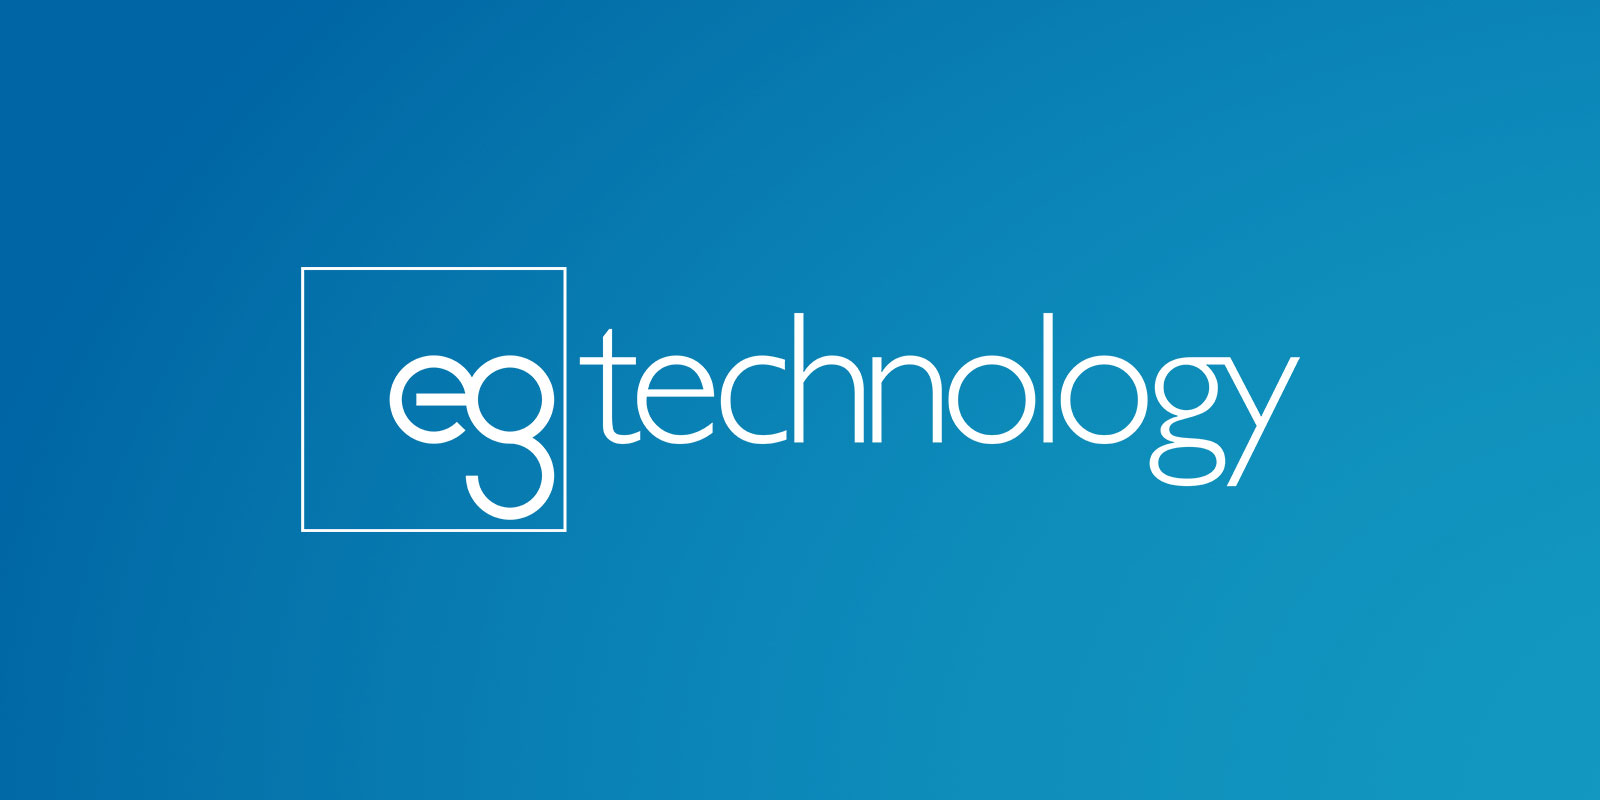 eg technology Continue To Grow With Marketing Investment